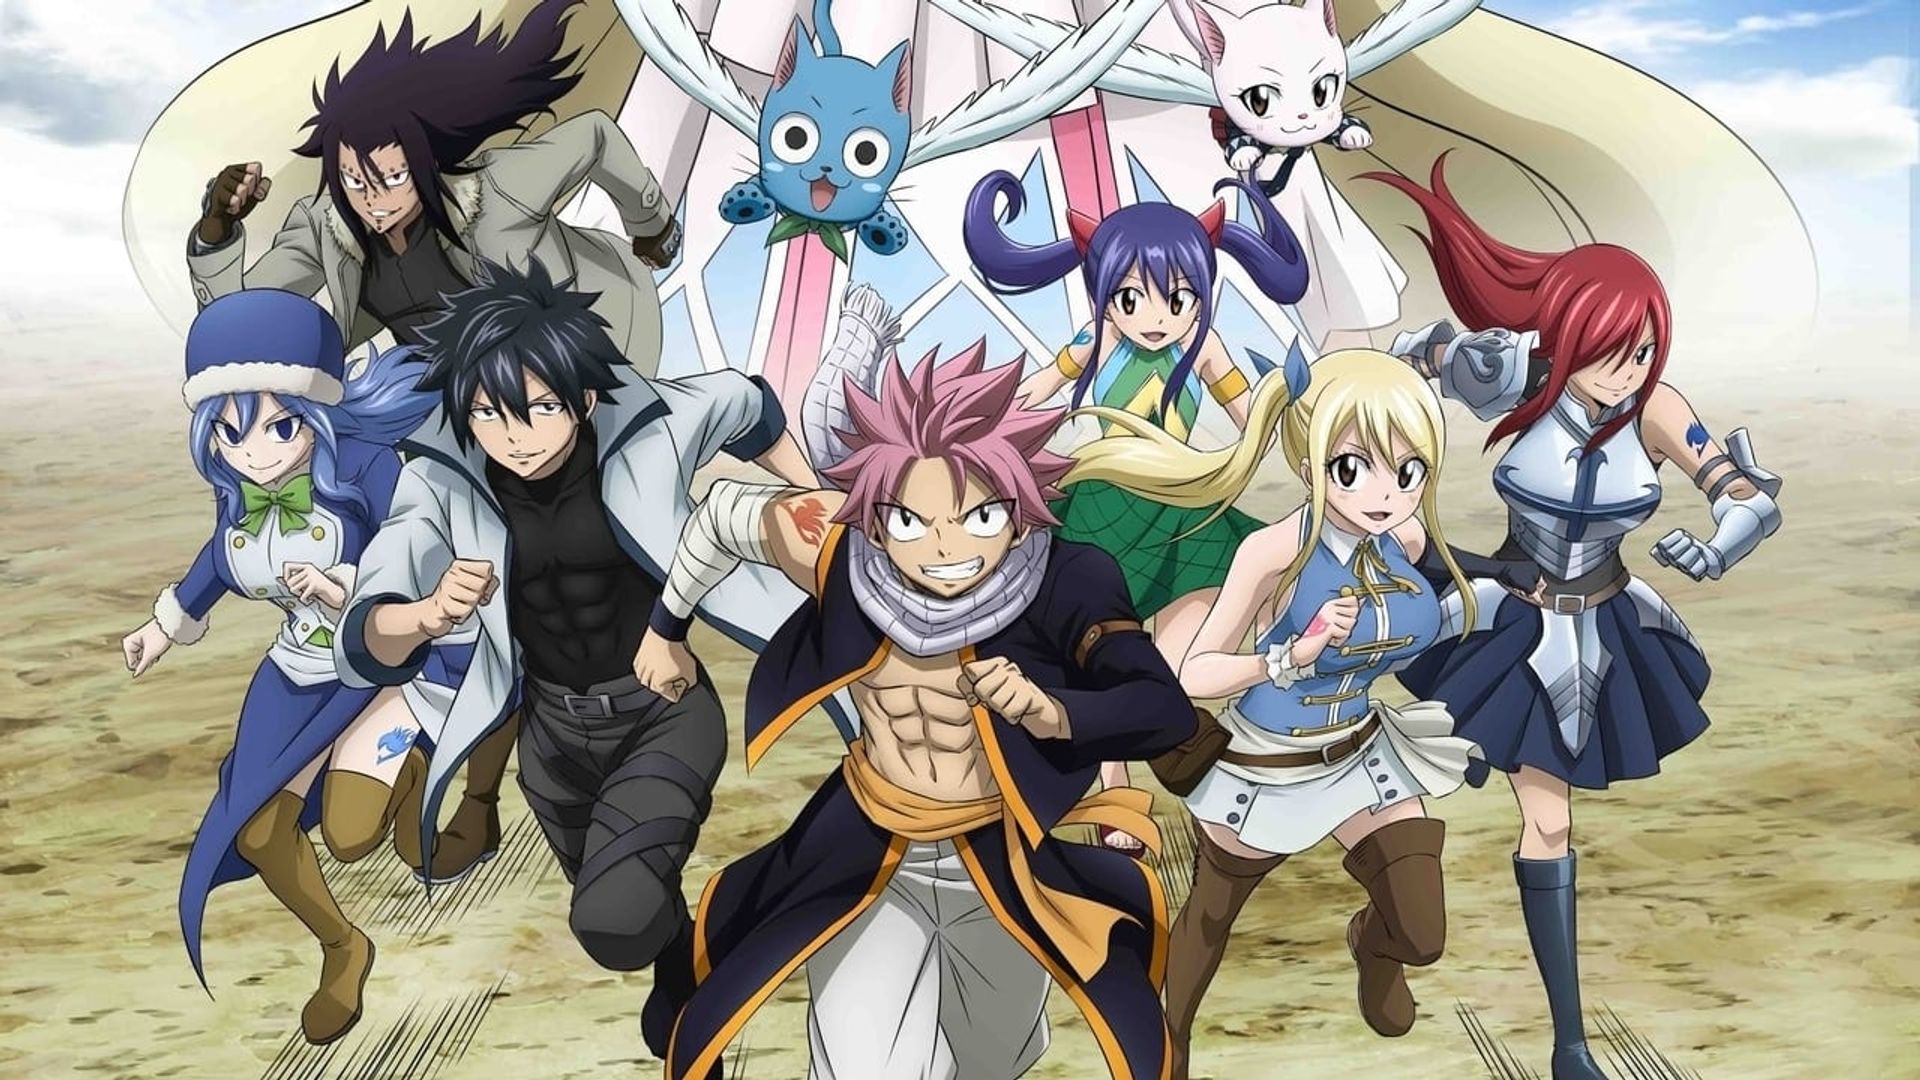 Fairy Tail - Watch Episodes on Hulu, Crunchyroll Premium, Funimation,  Crunchyroll, and Streaming Online | Reelgood